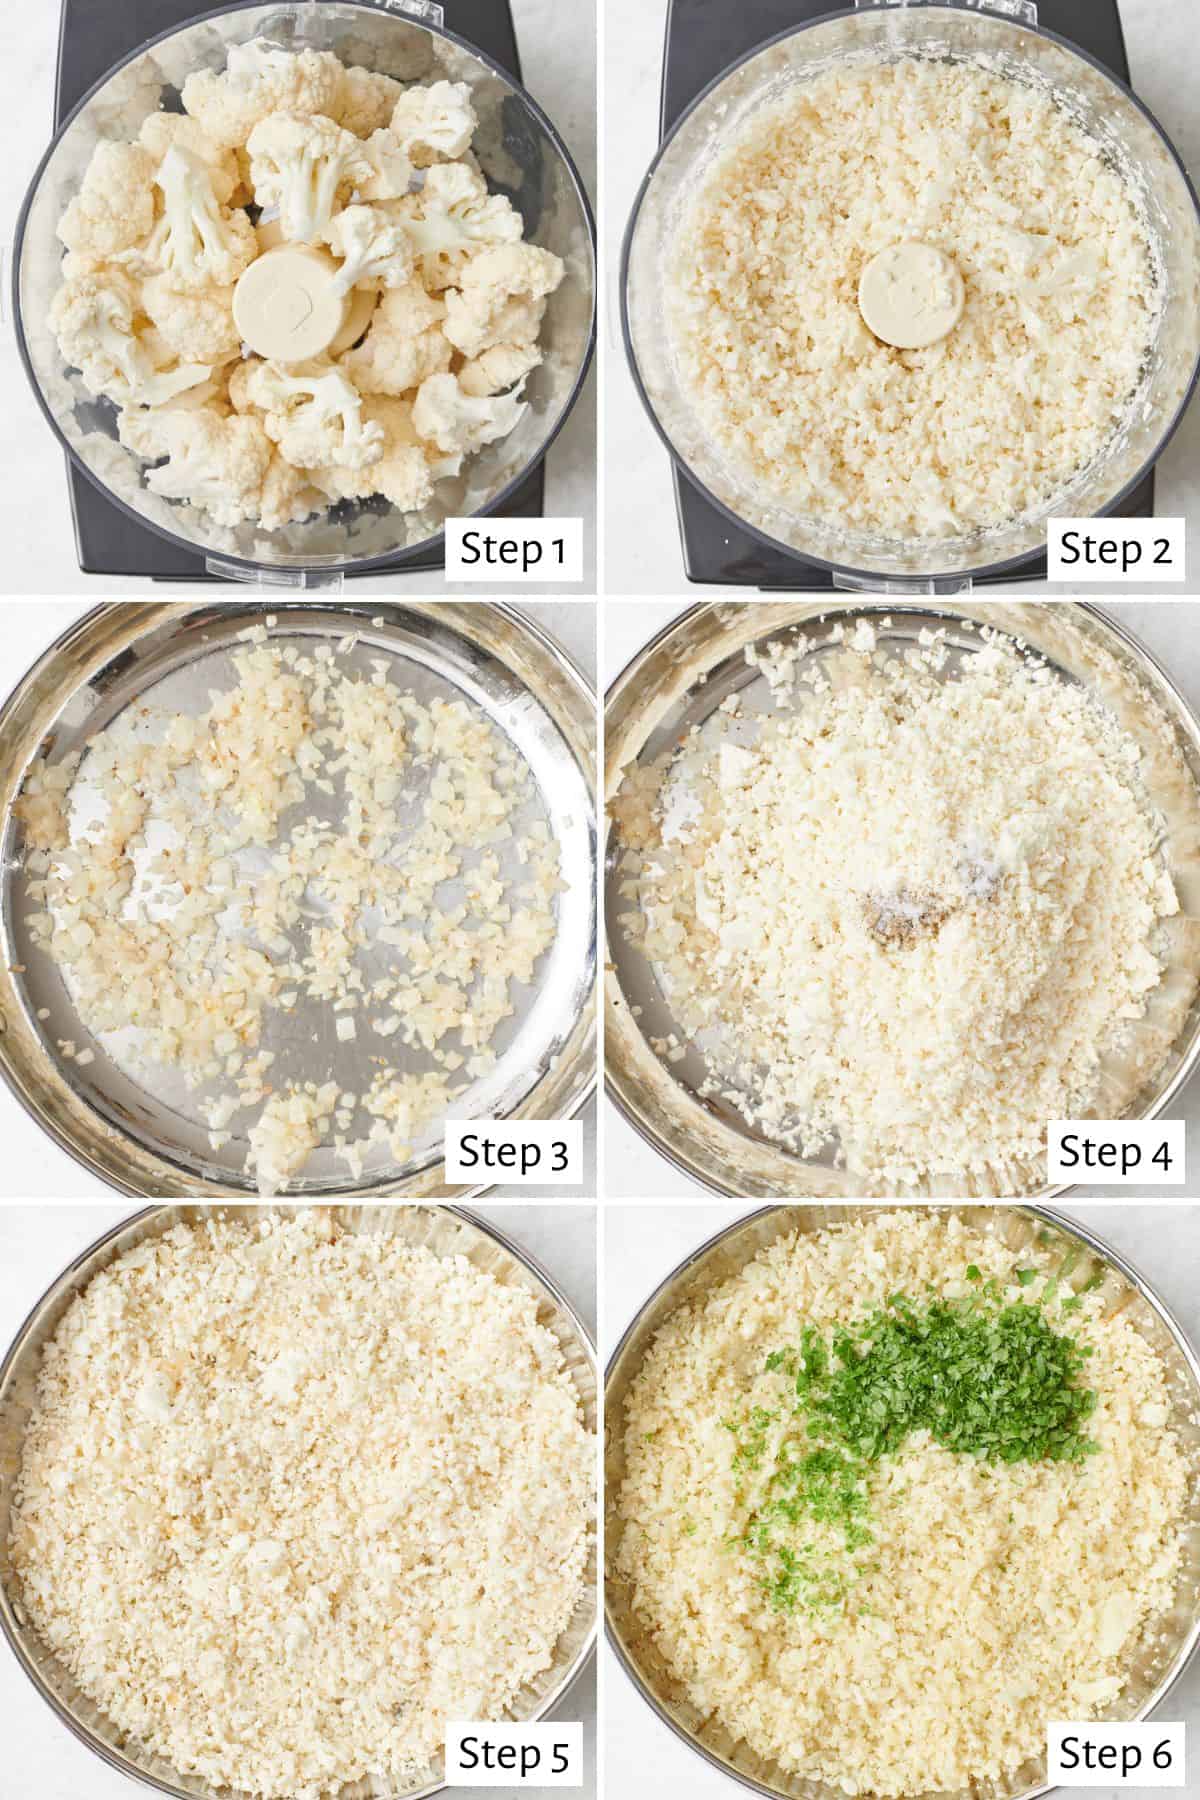 6 image collage making recipe: 1- cauliflower added to a food processor, 2- after processing into "rice" sized pieces, 3- chopped onions in a large skillet, 4- cauliflower rice and spices added to skillet, 5- after tossing together, 6- after cooking with fresh chopped cilantro added.